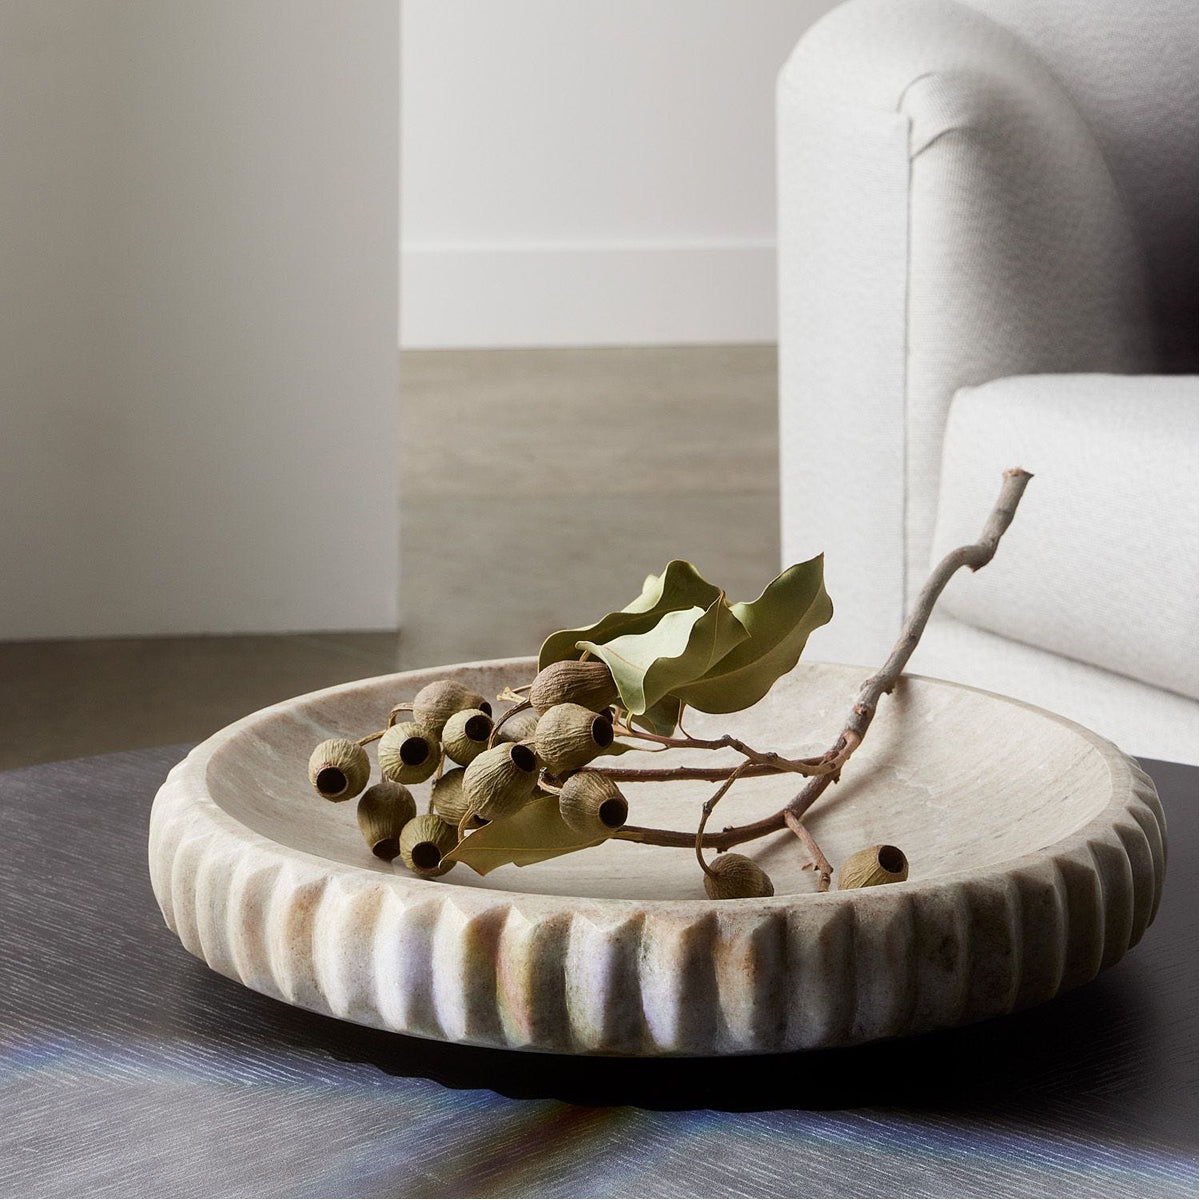 Made Goods Analia Round Marble Outdoor Tray